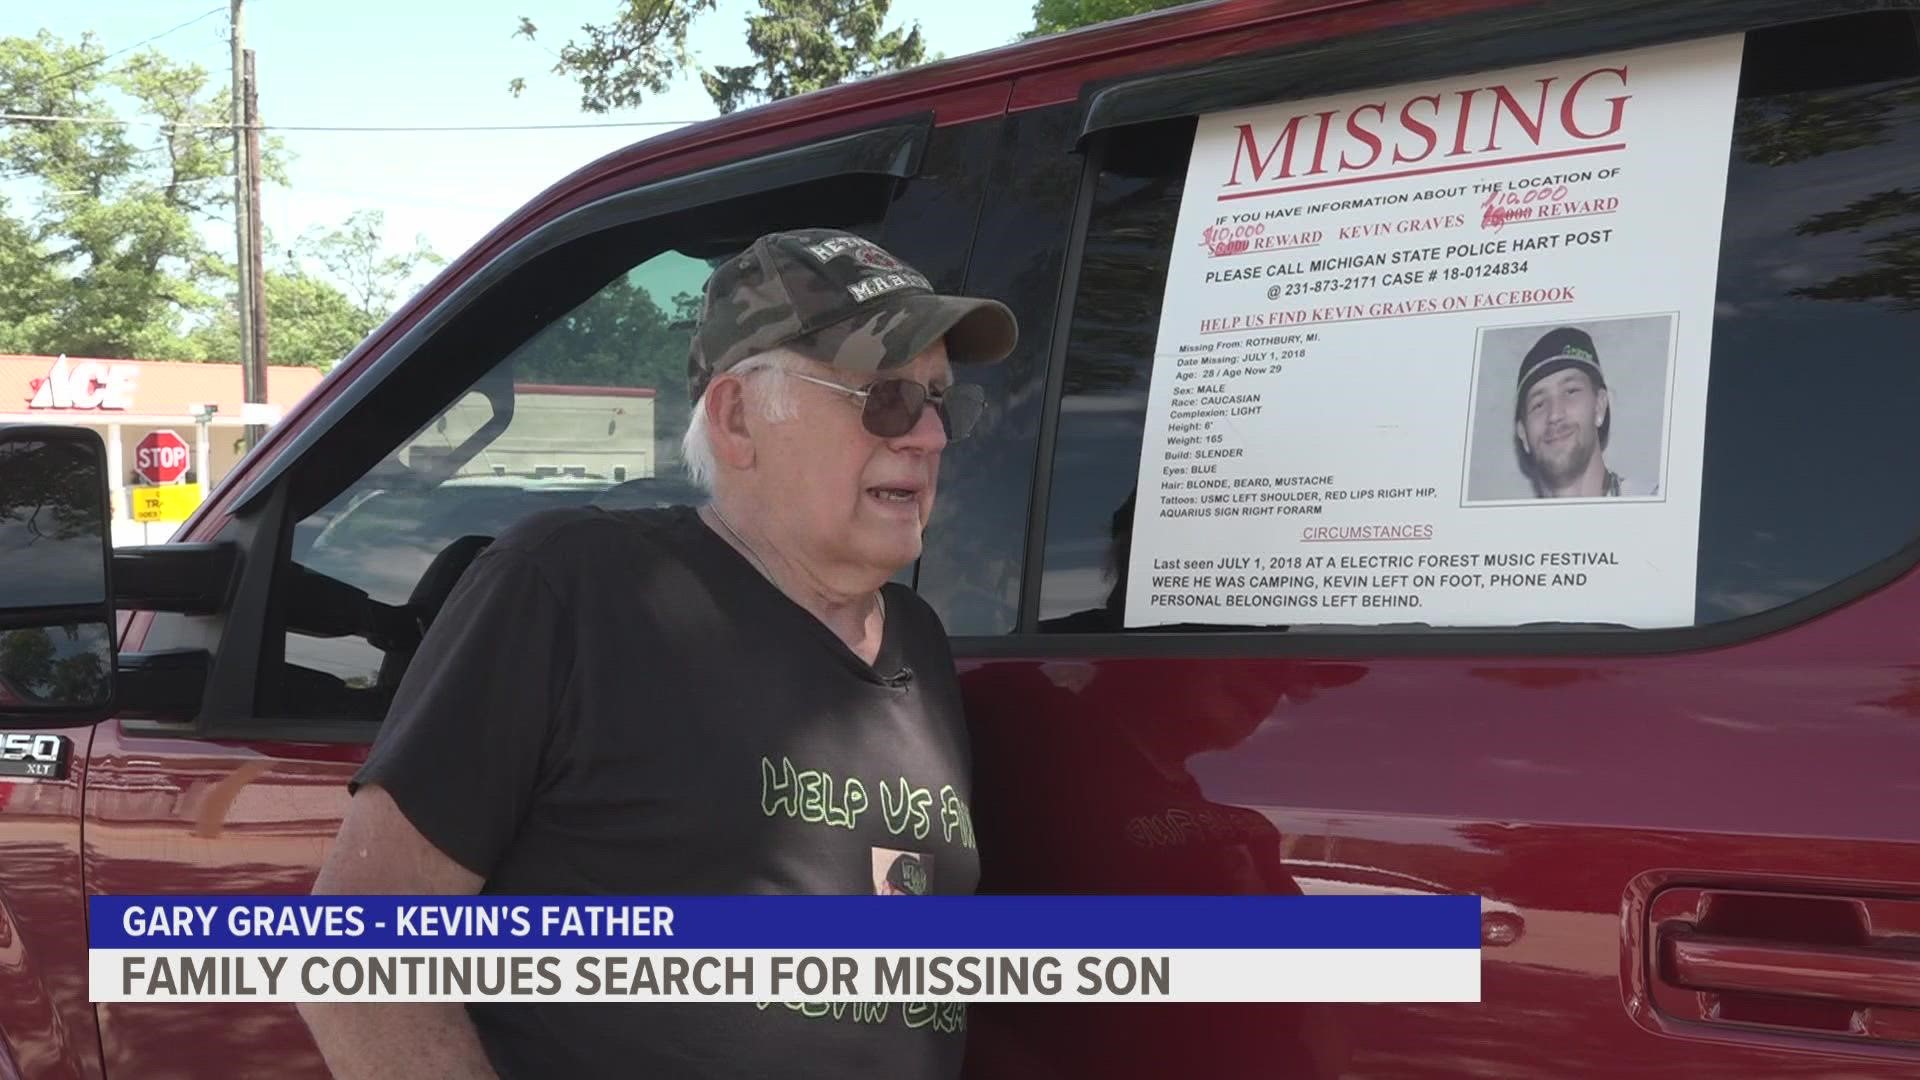 Kevin Graves went missing in 2018 while attending Electric Forest and still hasn't been found. His family still searches for him as they haven't given up hope.